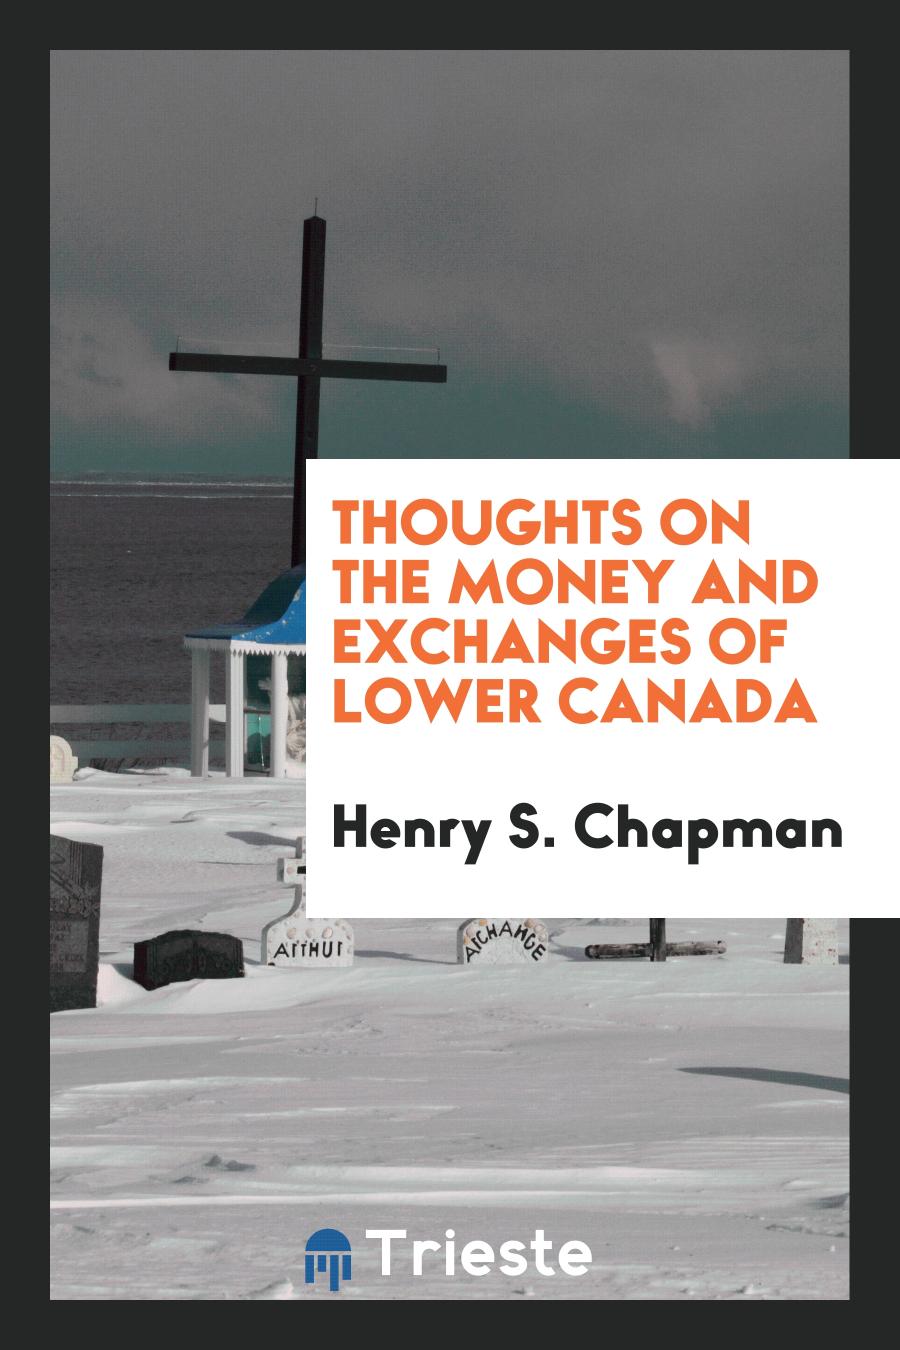 Thoughts on the Money and Exchanges of Lower Canada